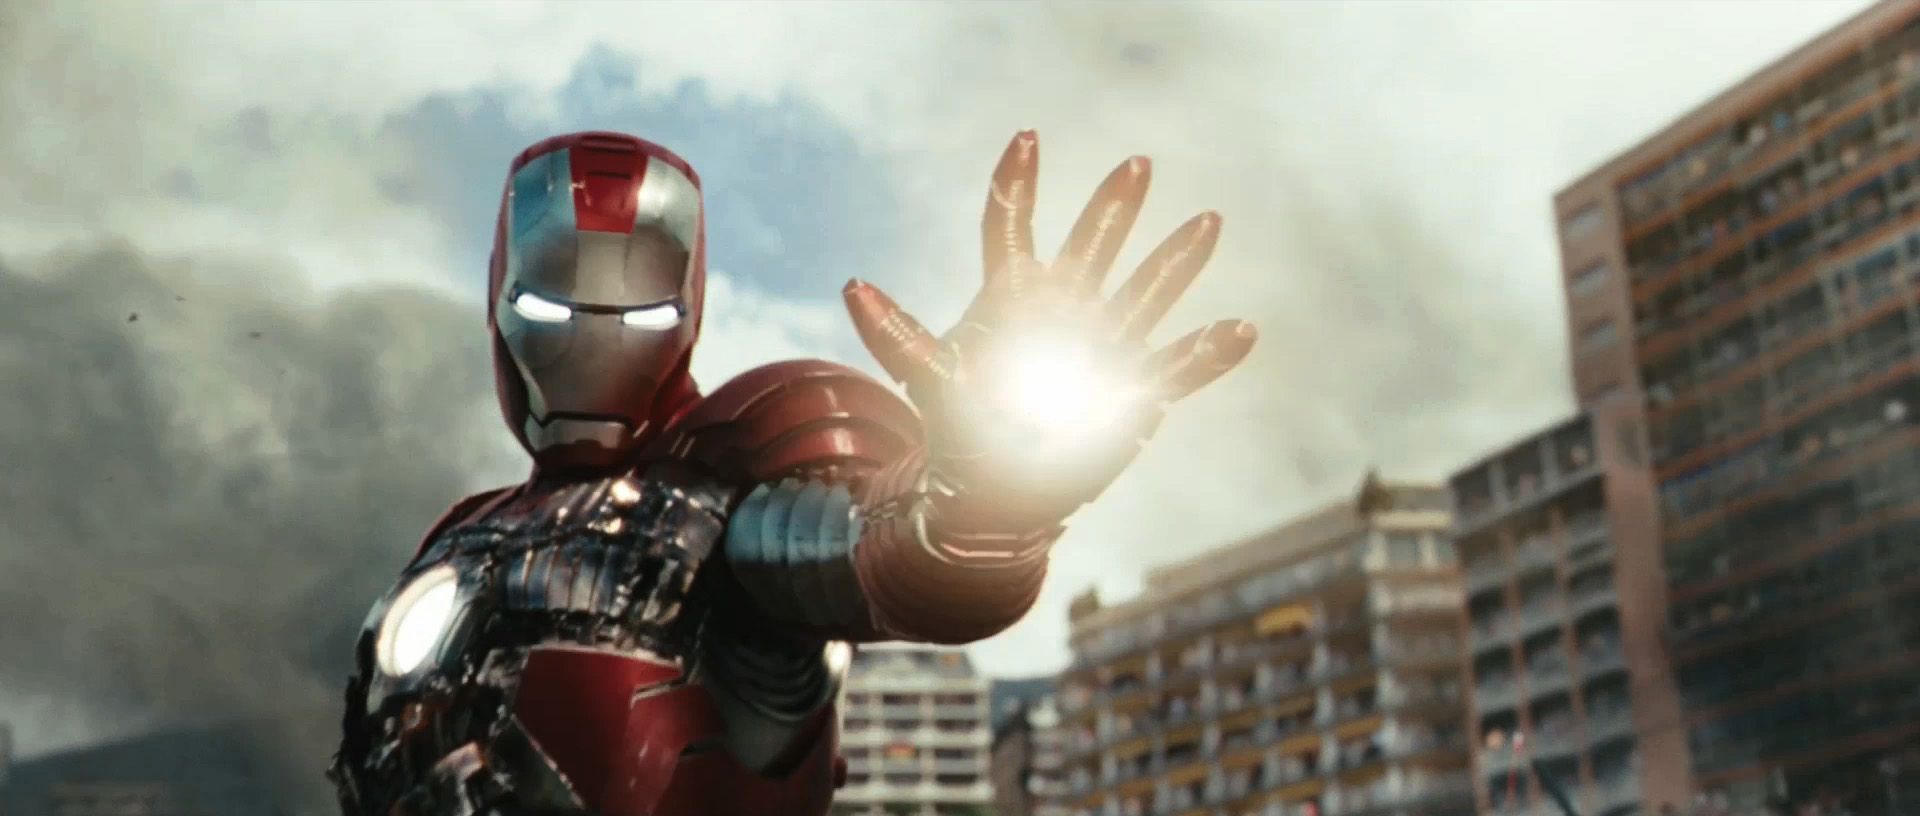 Second Full-Length Iron Man 2 Trailer Is Here!